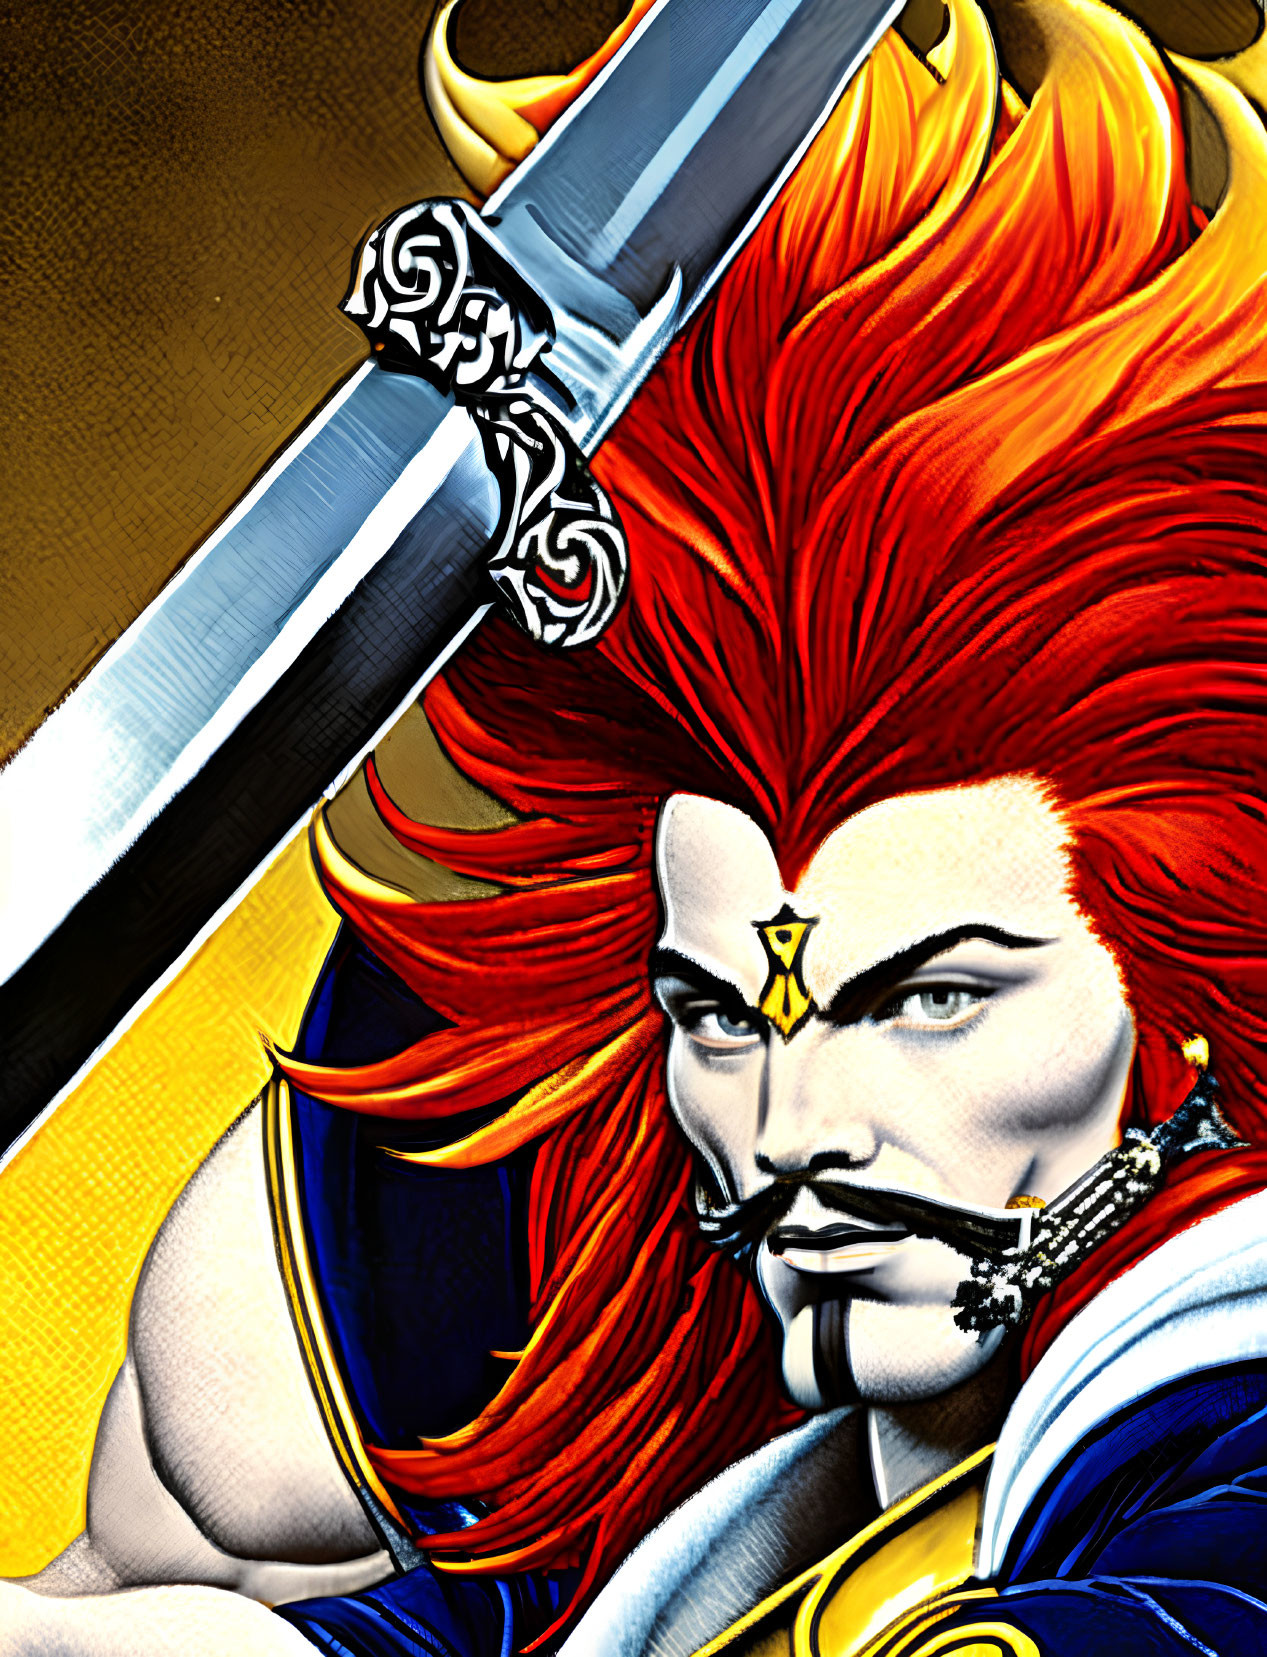 Fantasy character with vibrant red hair wielding a sword in elaborate armor